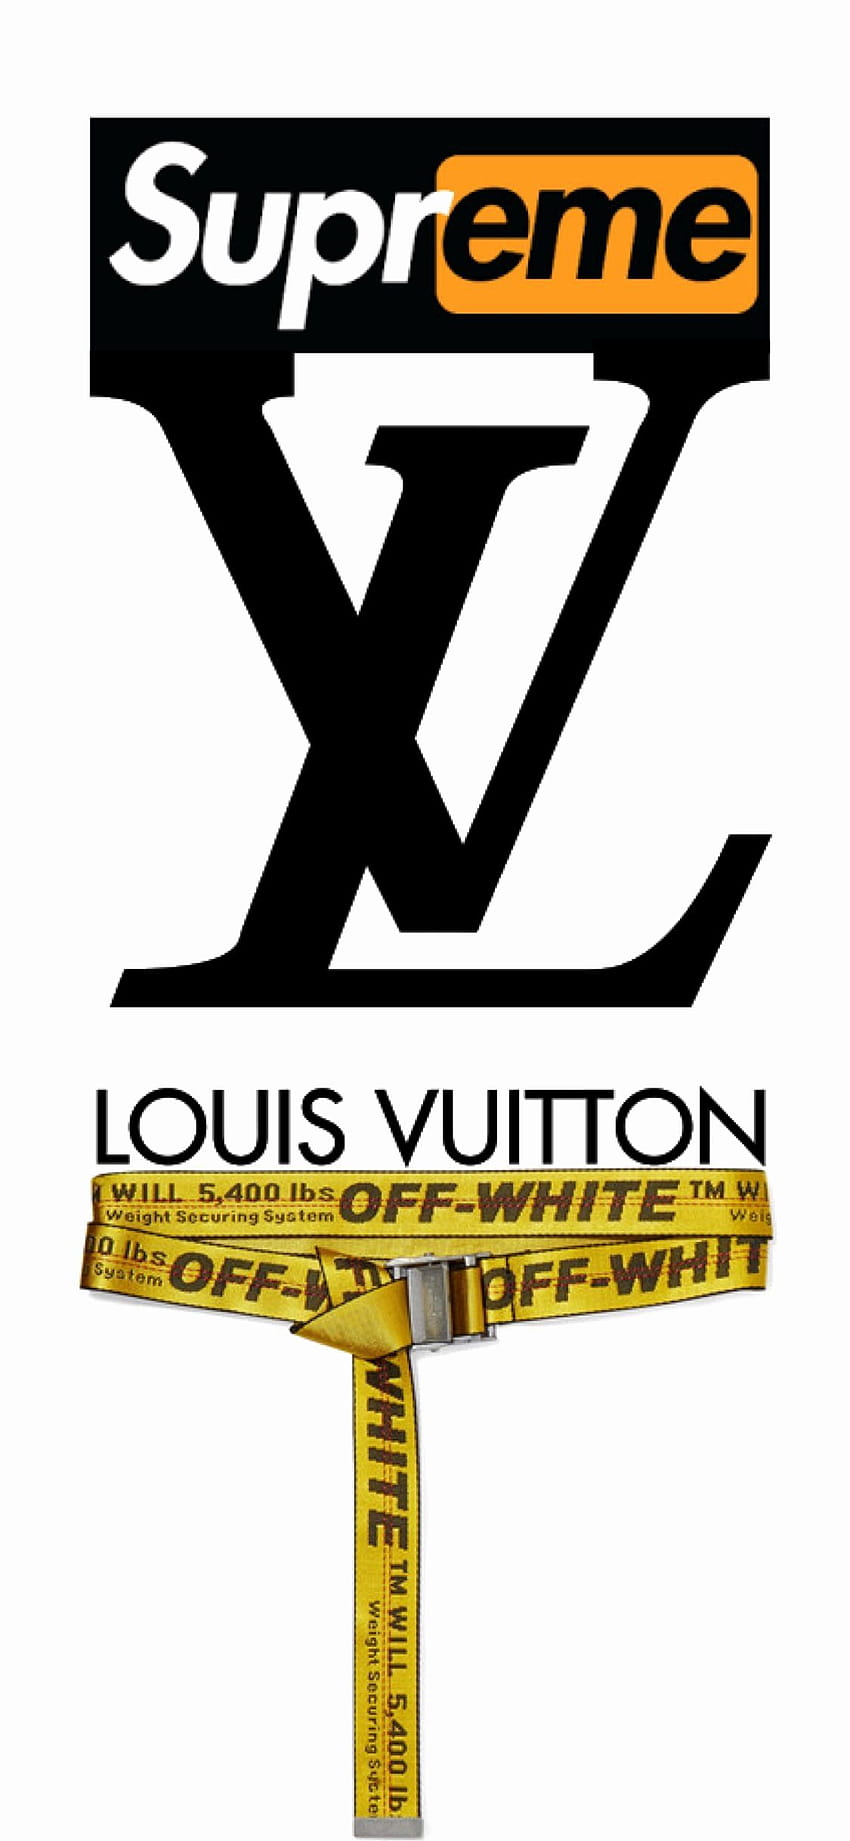 🔥 #louis vuitton off white wallpaper - louis vuitton edit - android /  iphone hd wallpaper background download HD Photos & Wallpapers (0+ Images)  - Page: 1